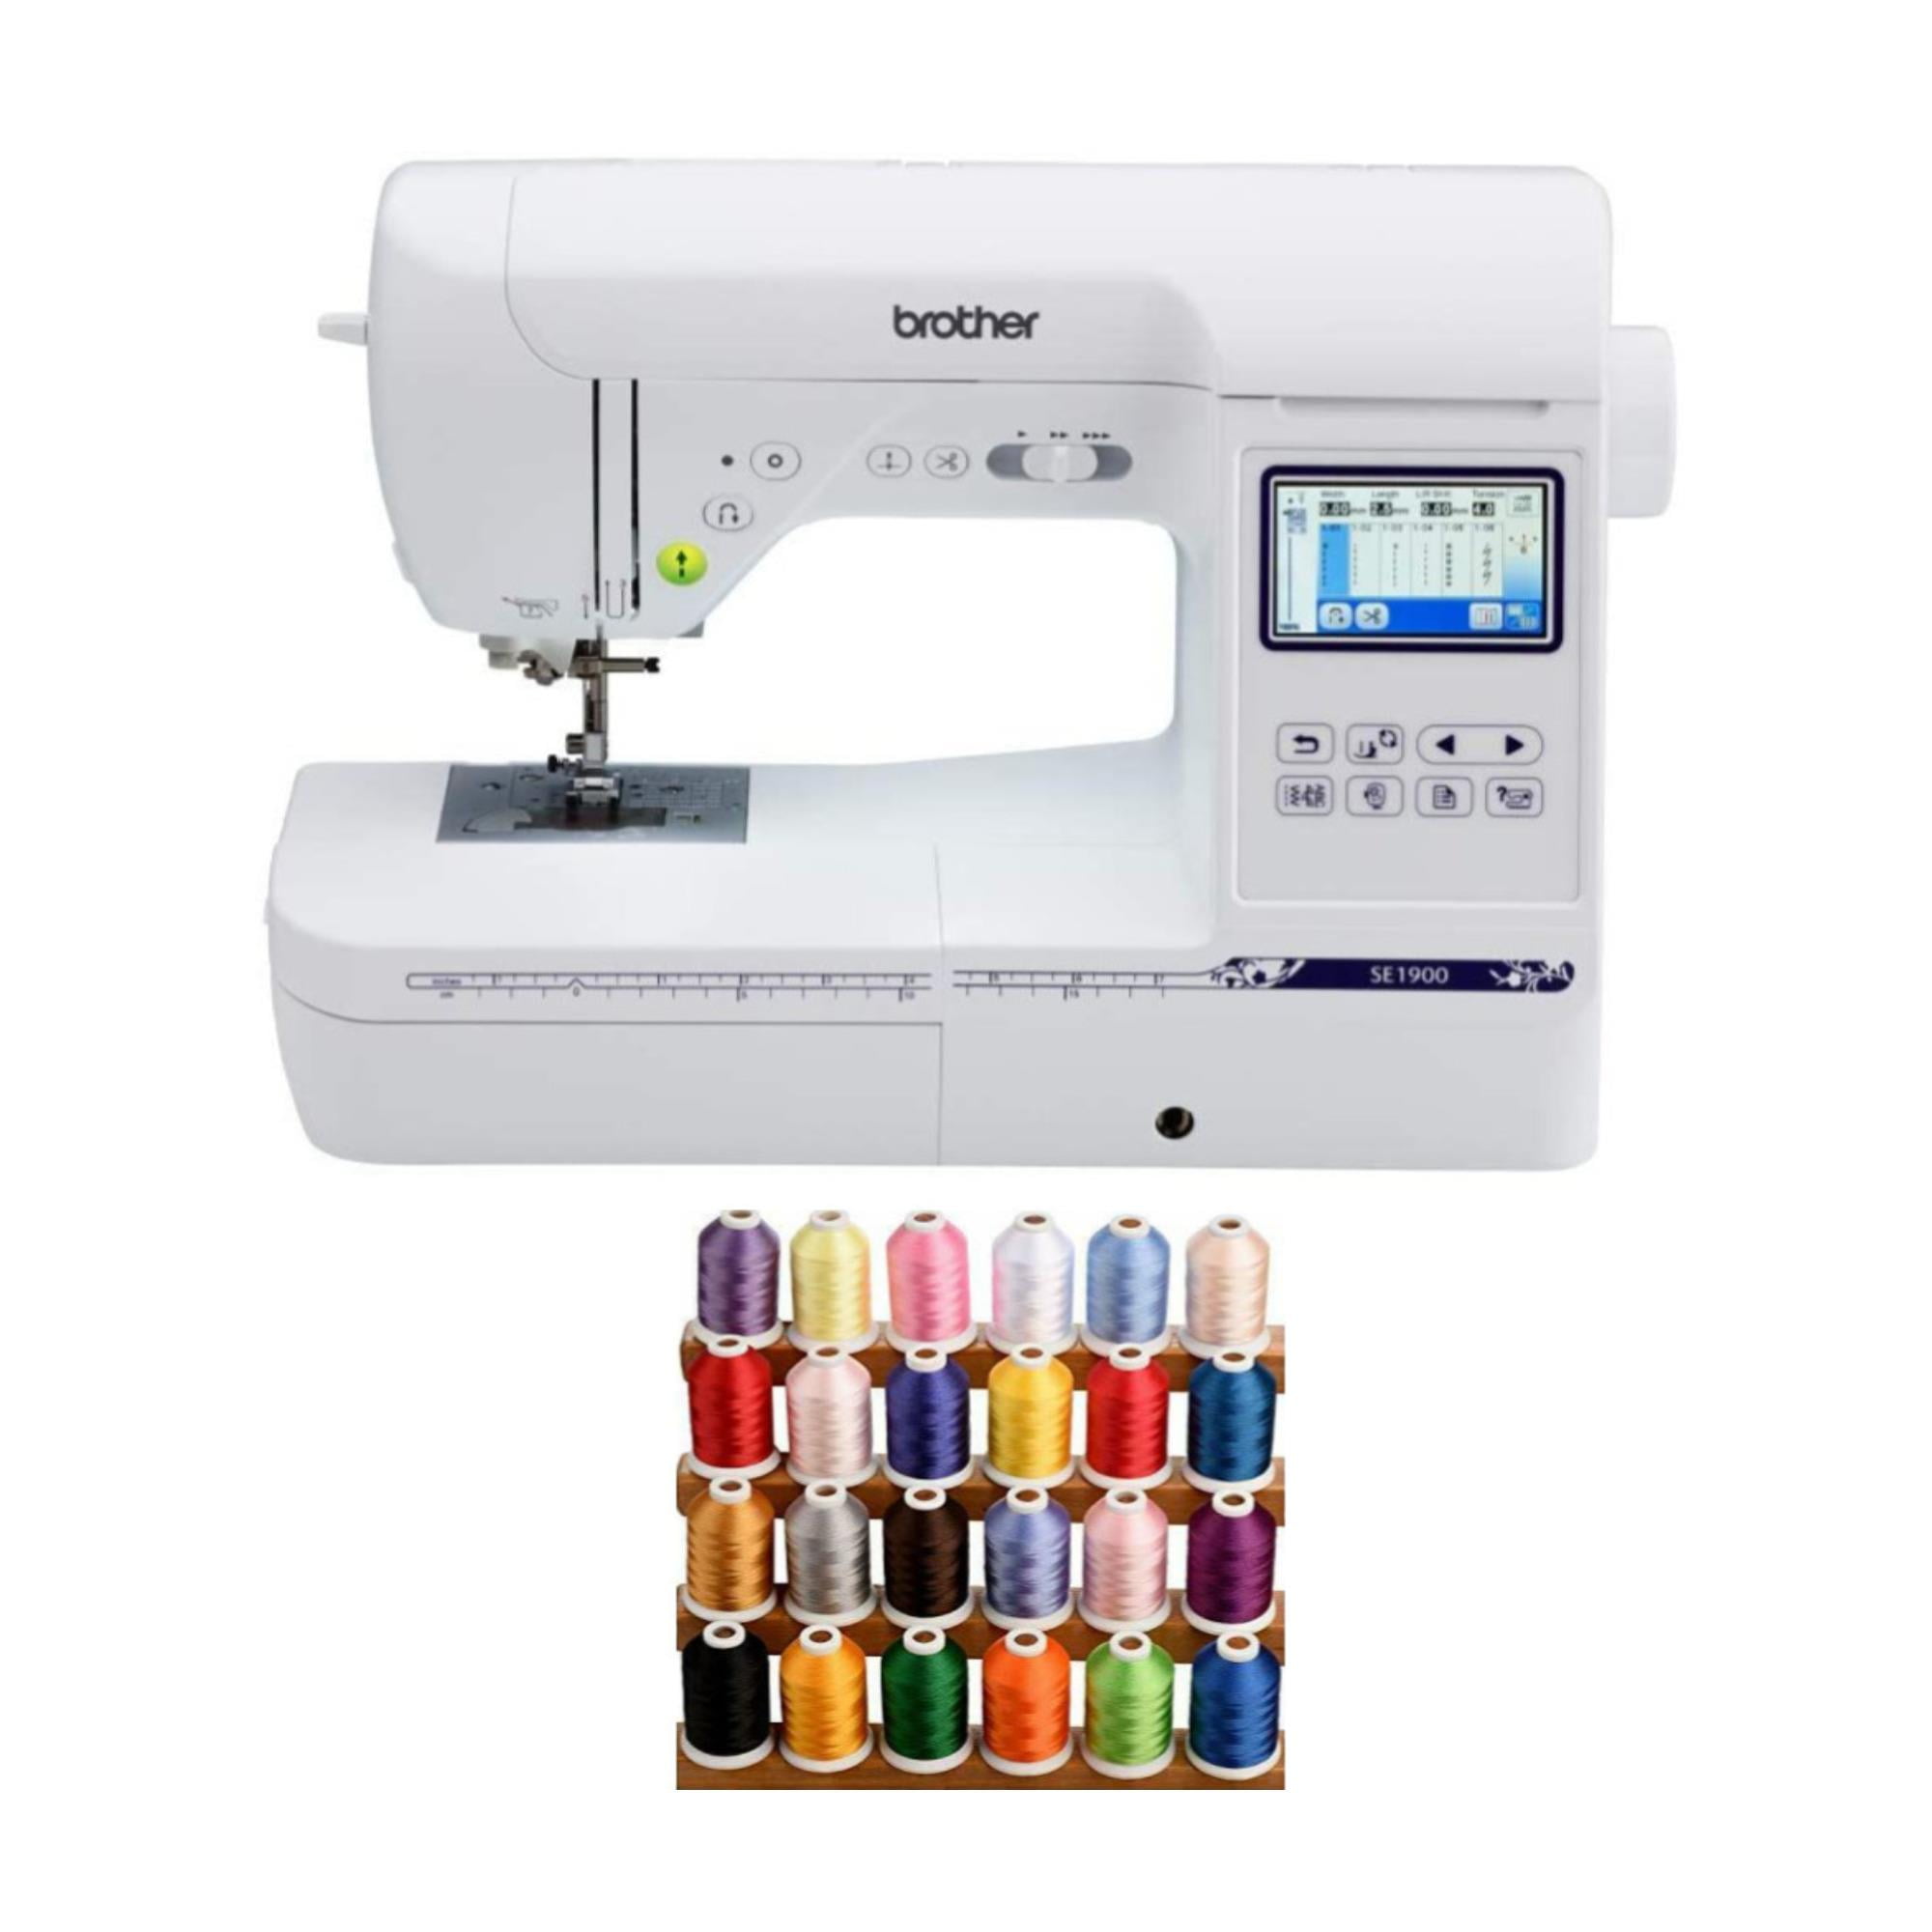  Brother SE1900 Sewing + Embroidery Machine, 5 x 7 Field Size,  240 Stitches, Includes Starter Package - 7 Spools of Polystar Thread,  10-Pack of Distinctive Bobbins + 1GB USB Drive w/ 30 Original Designs